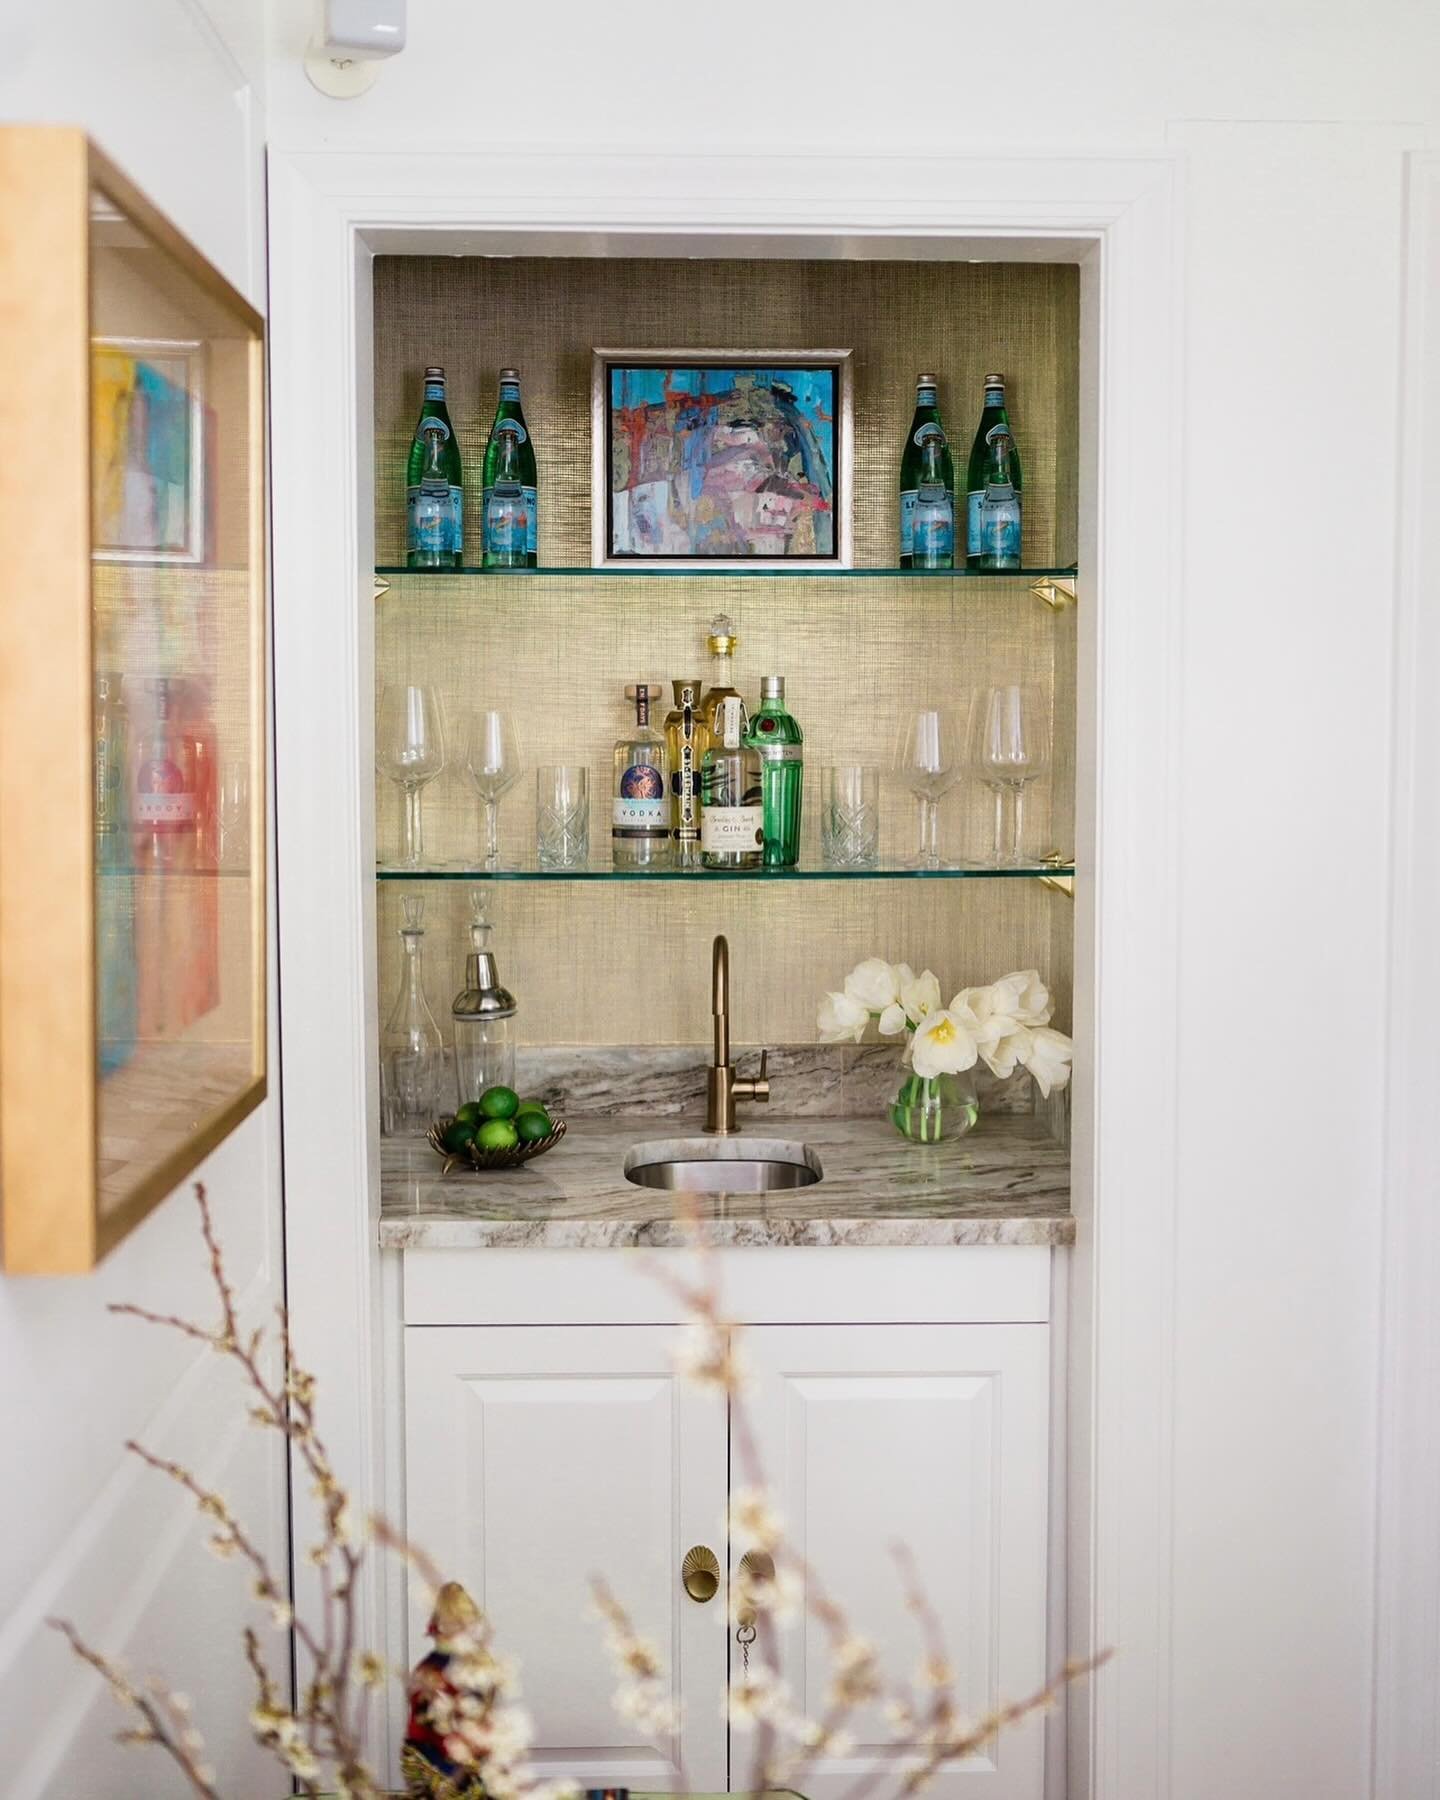 Cheers to the weekend! Friday nights are made for great drinks and good vibes!  Styled by Nicole Culler. 📸 @mariawestphotography  #cullerproject#homebardesign#fridaynightcocktailhour#weekendvibes#interiordesign#homebarideas#designingbesutifulspaces#